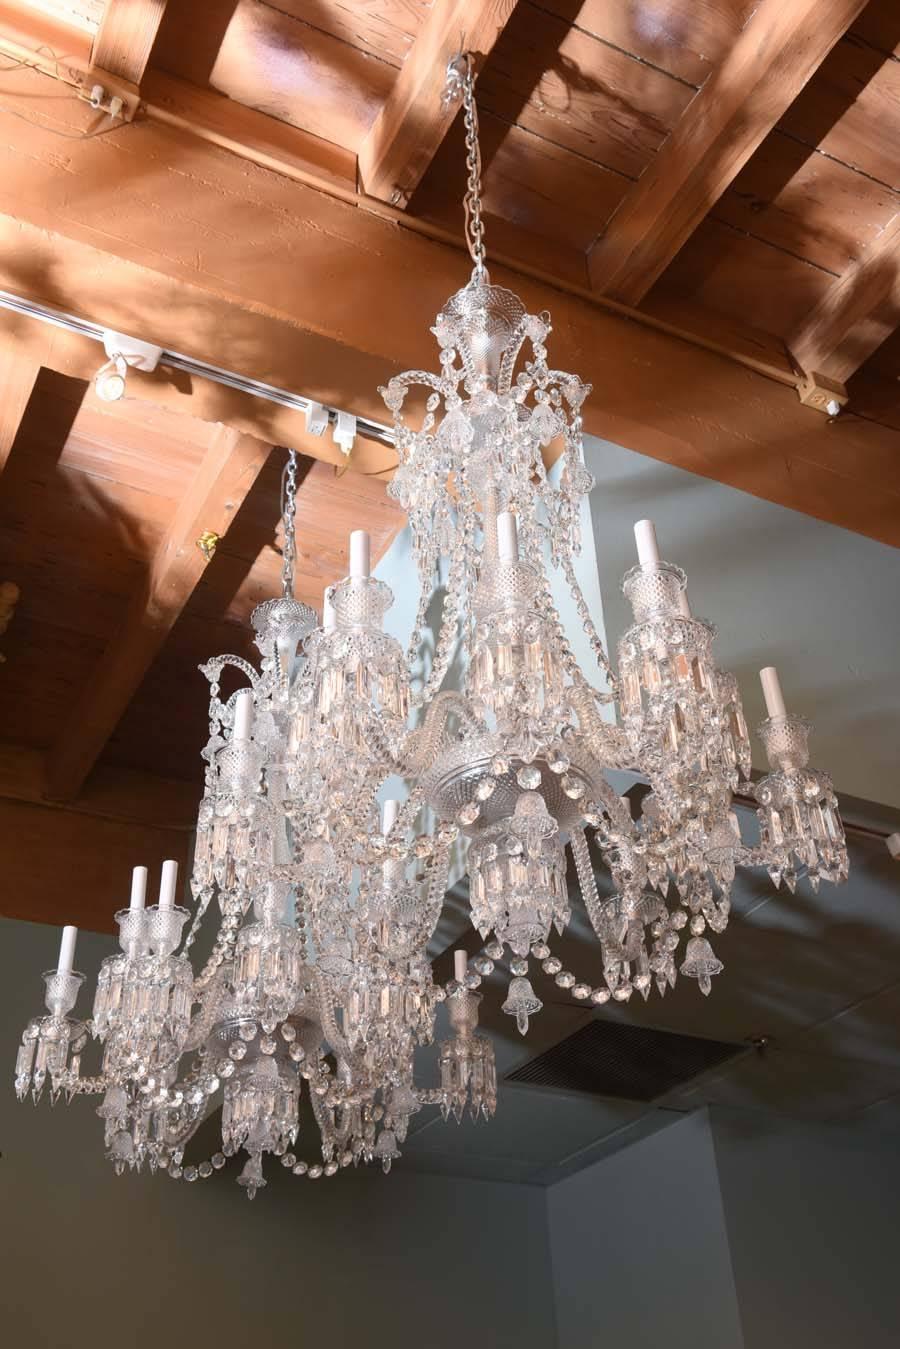 Pair of Baccarat Glass Twelve-Arm Chandeliers, Signed Baccarat 1